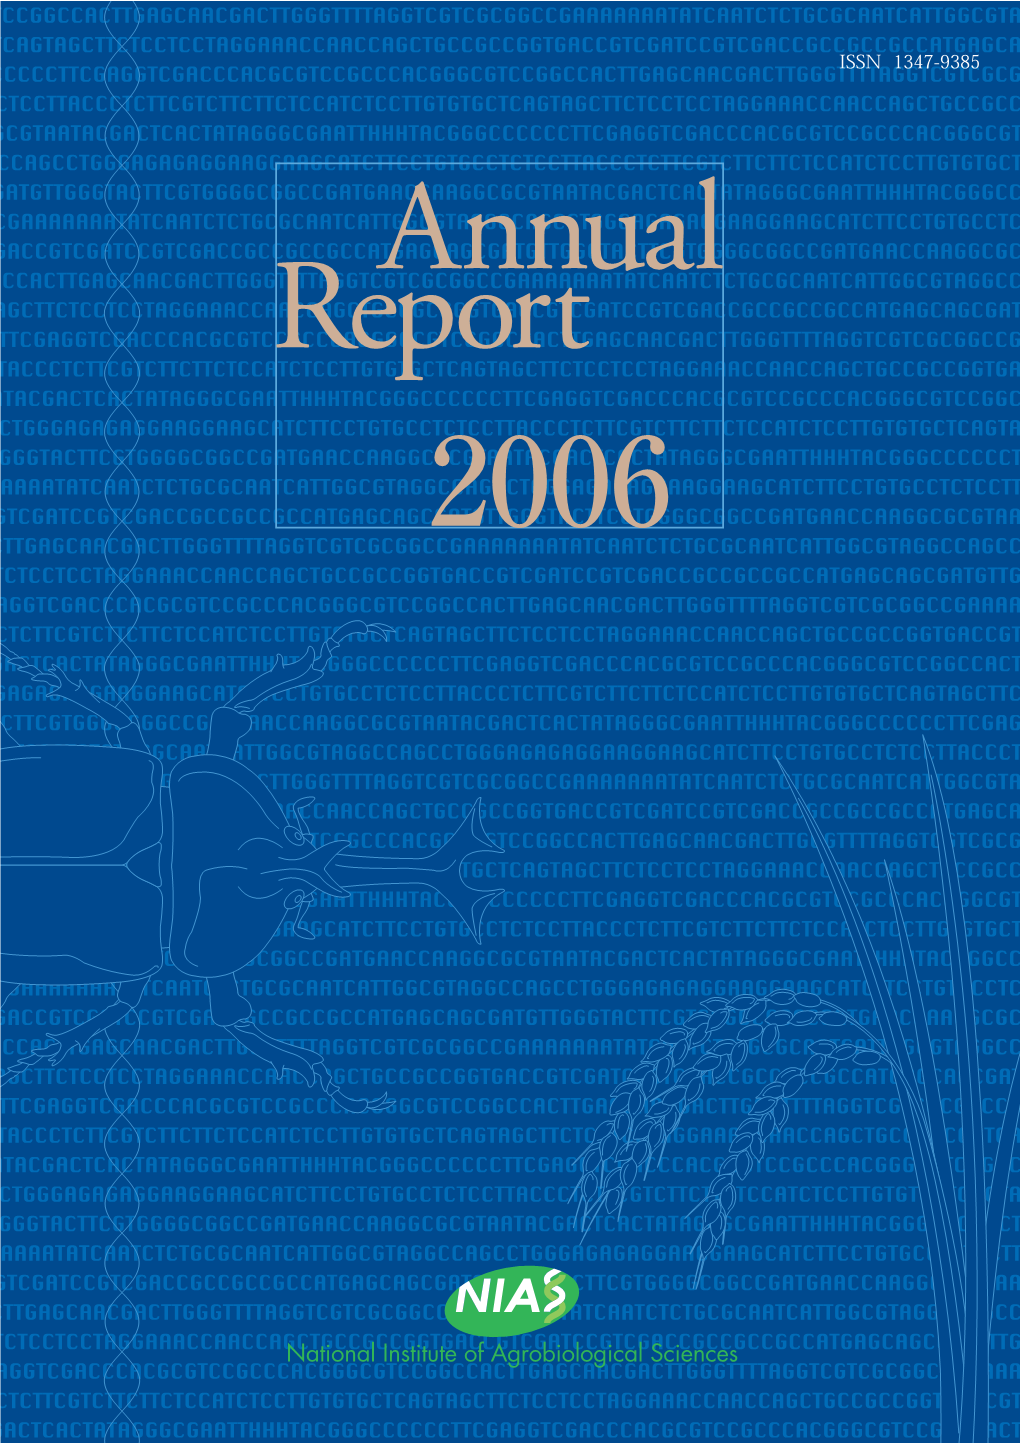 Annual Report 2006 (Apr.2005 � Mar.2006) (In the Fiscal Year 2005) !$--"&$ %,*( */, +,$-'#$)